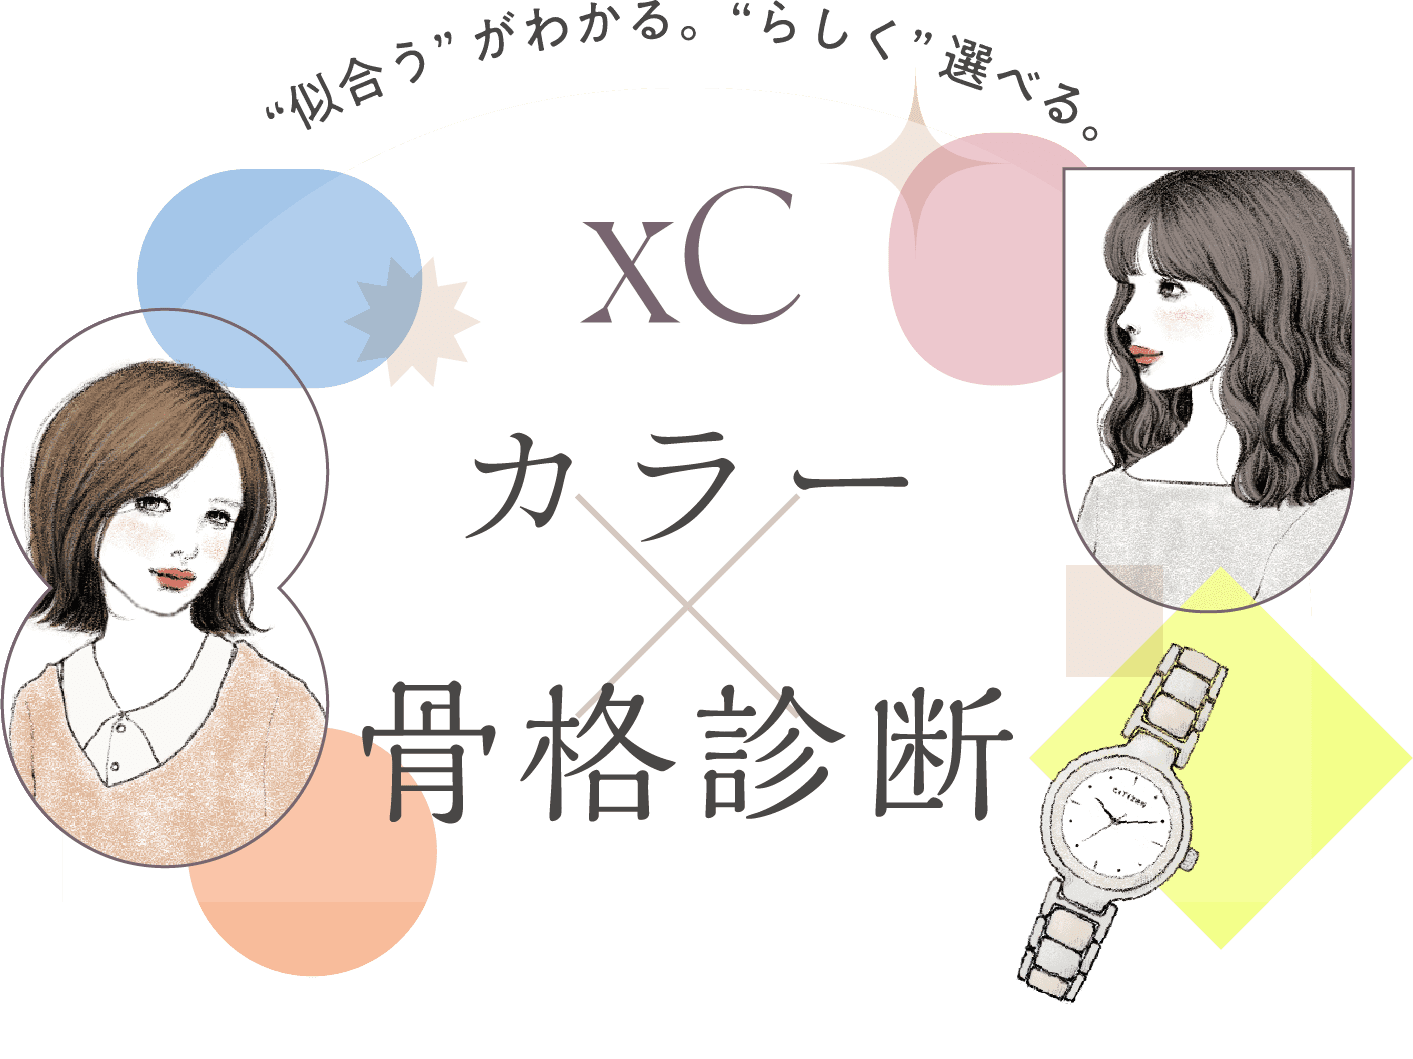 XC カラー 骨格診断